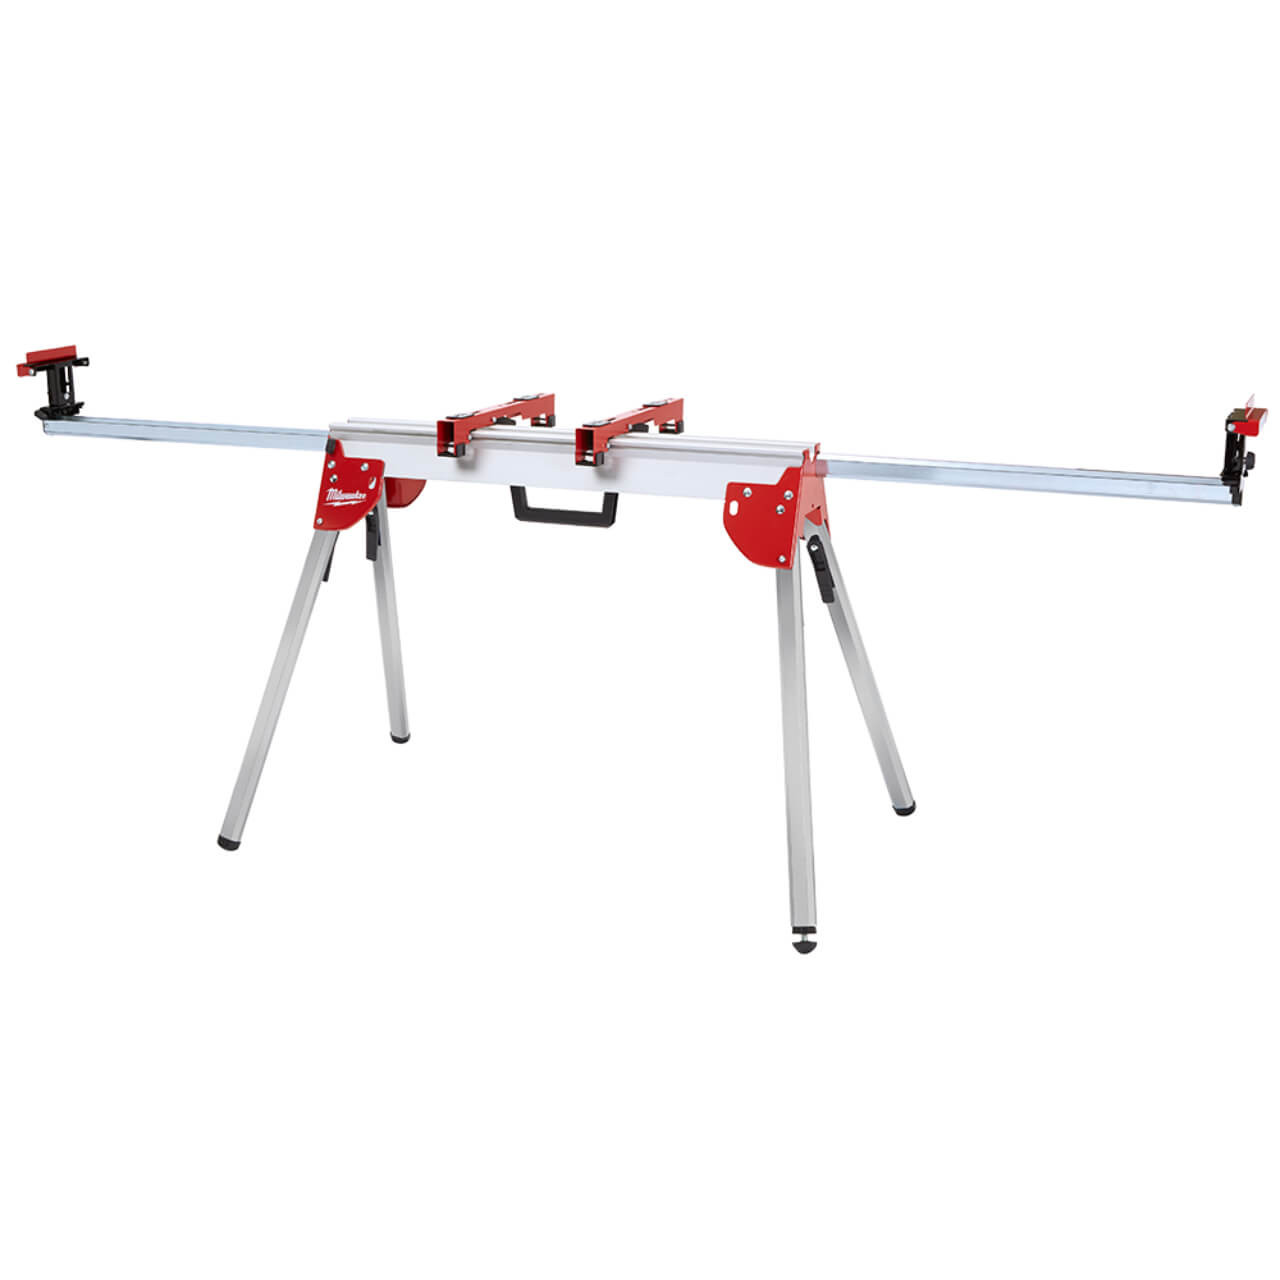 Milwaukee 2.55m Folding Extension Mitre Saw Stand